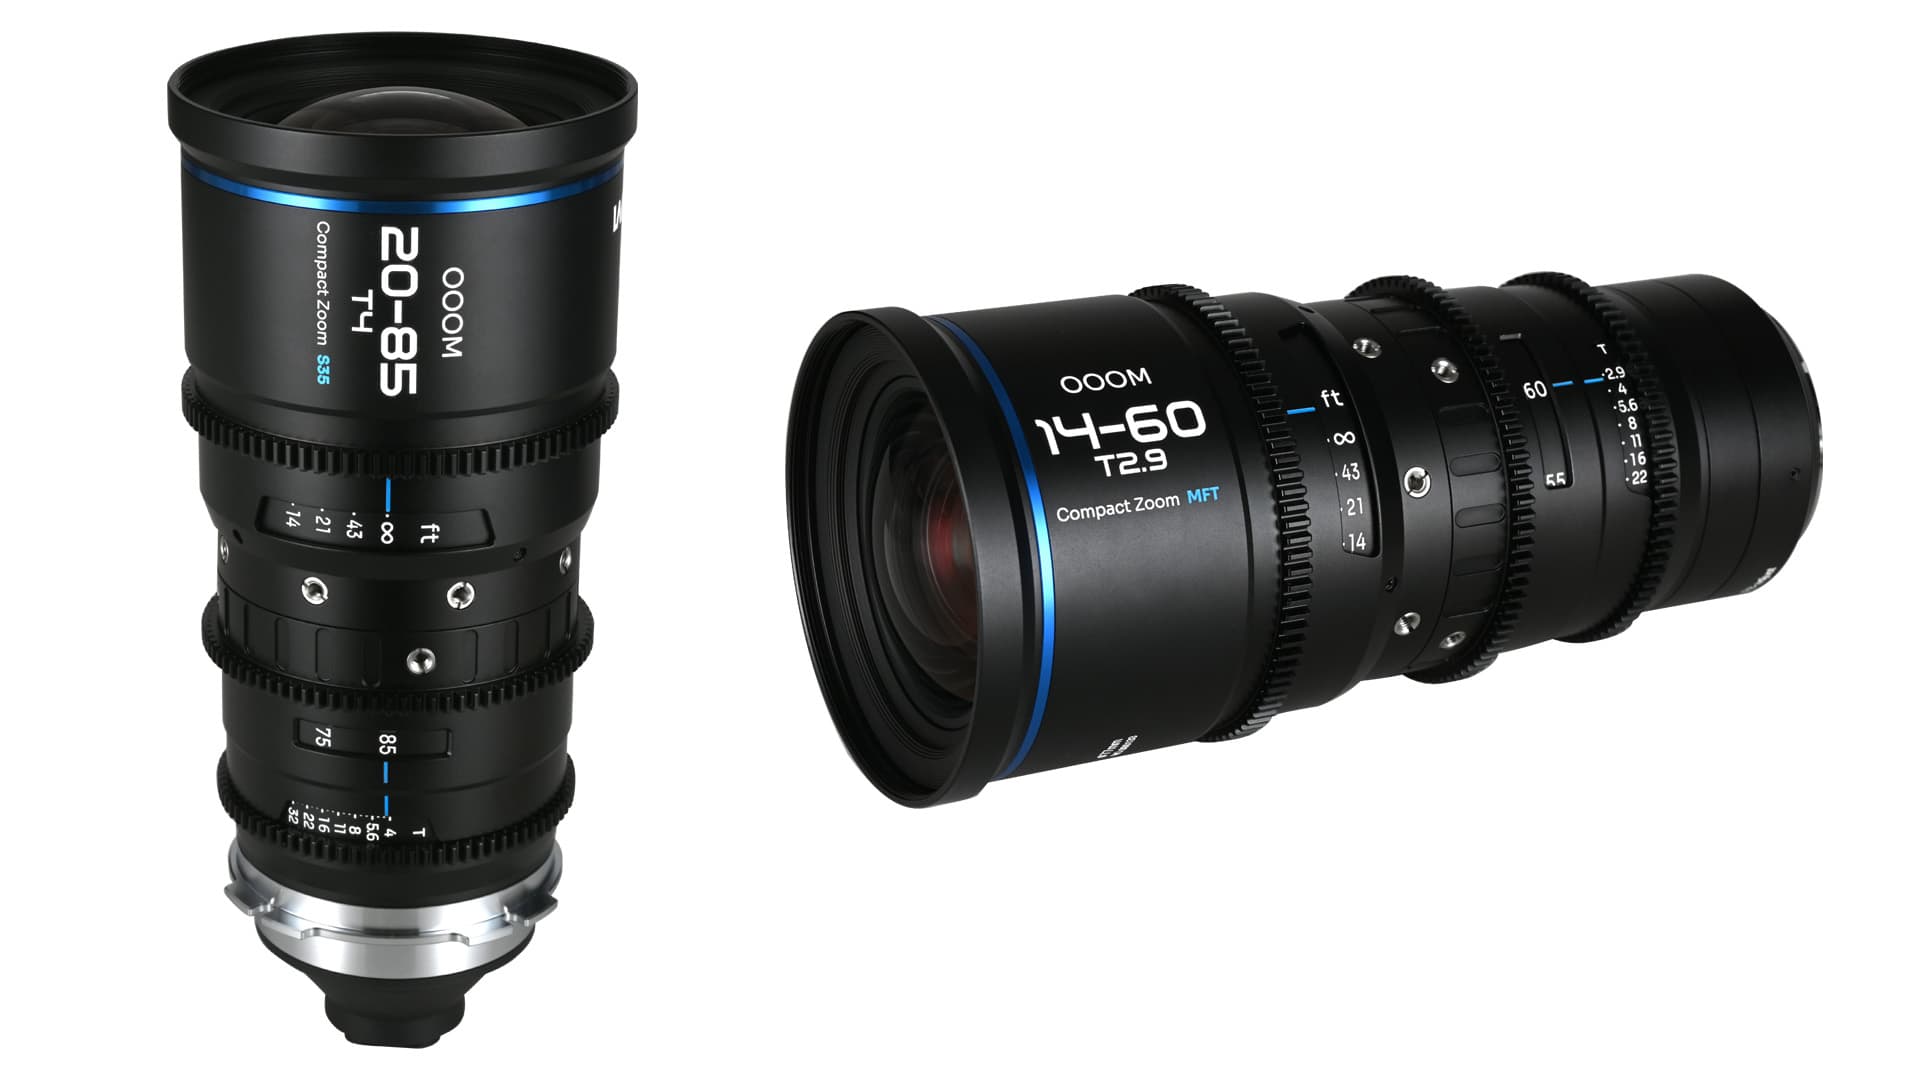 The new OOOM lenses are both priced at $1999